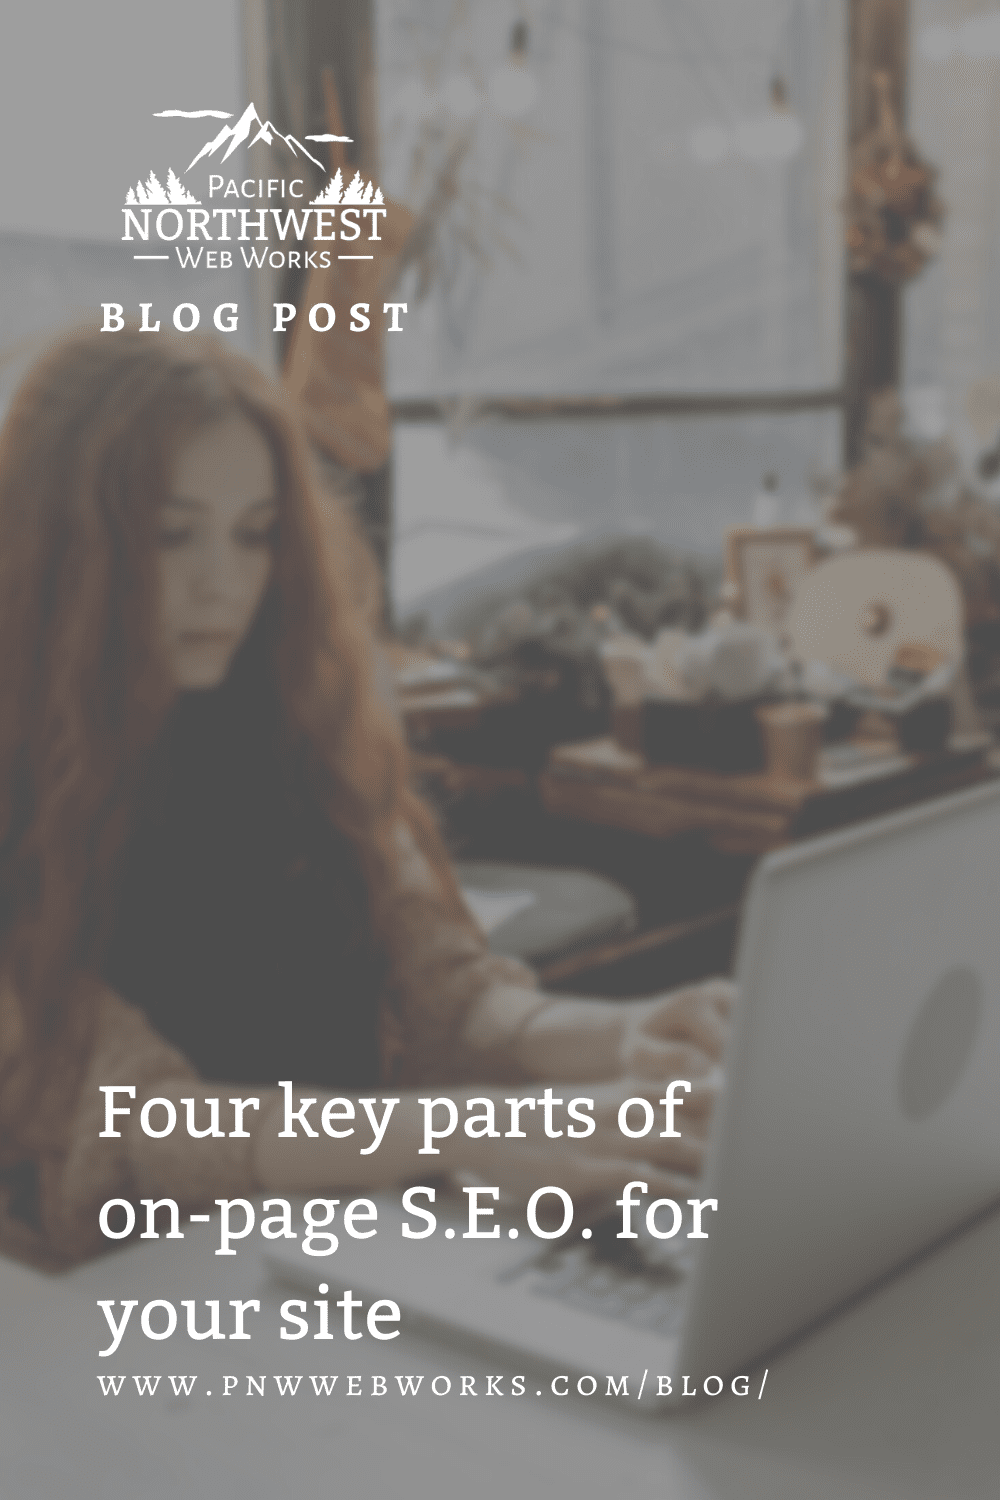 Four key parts of on-page S.E.O. for your site